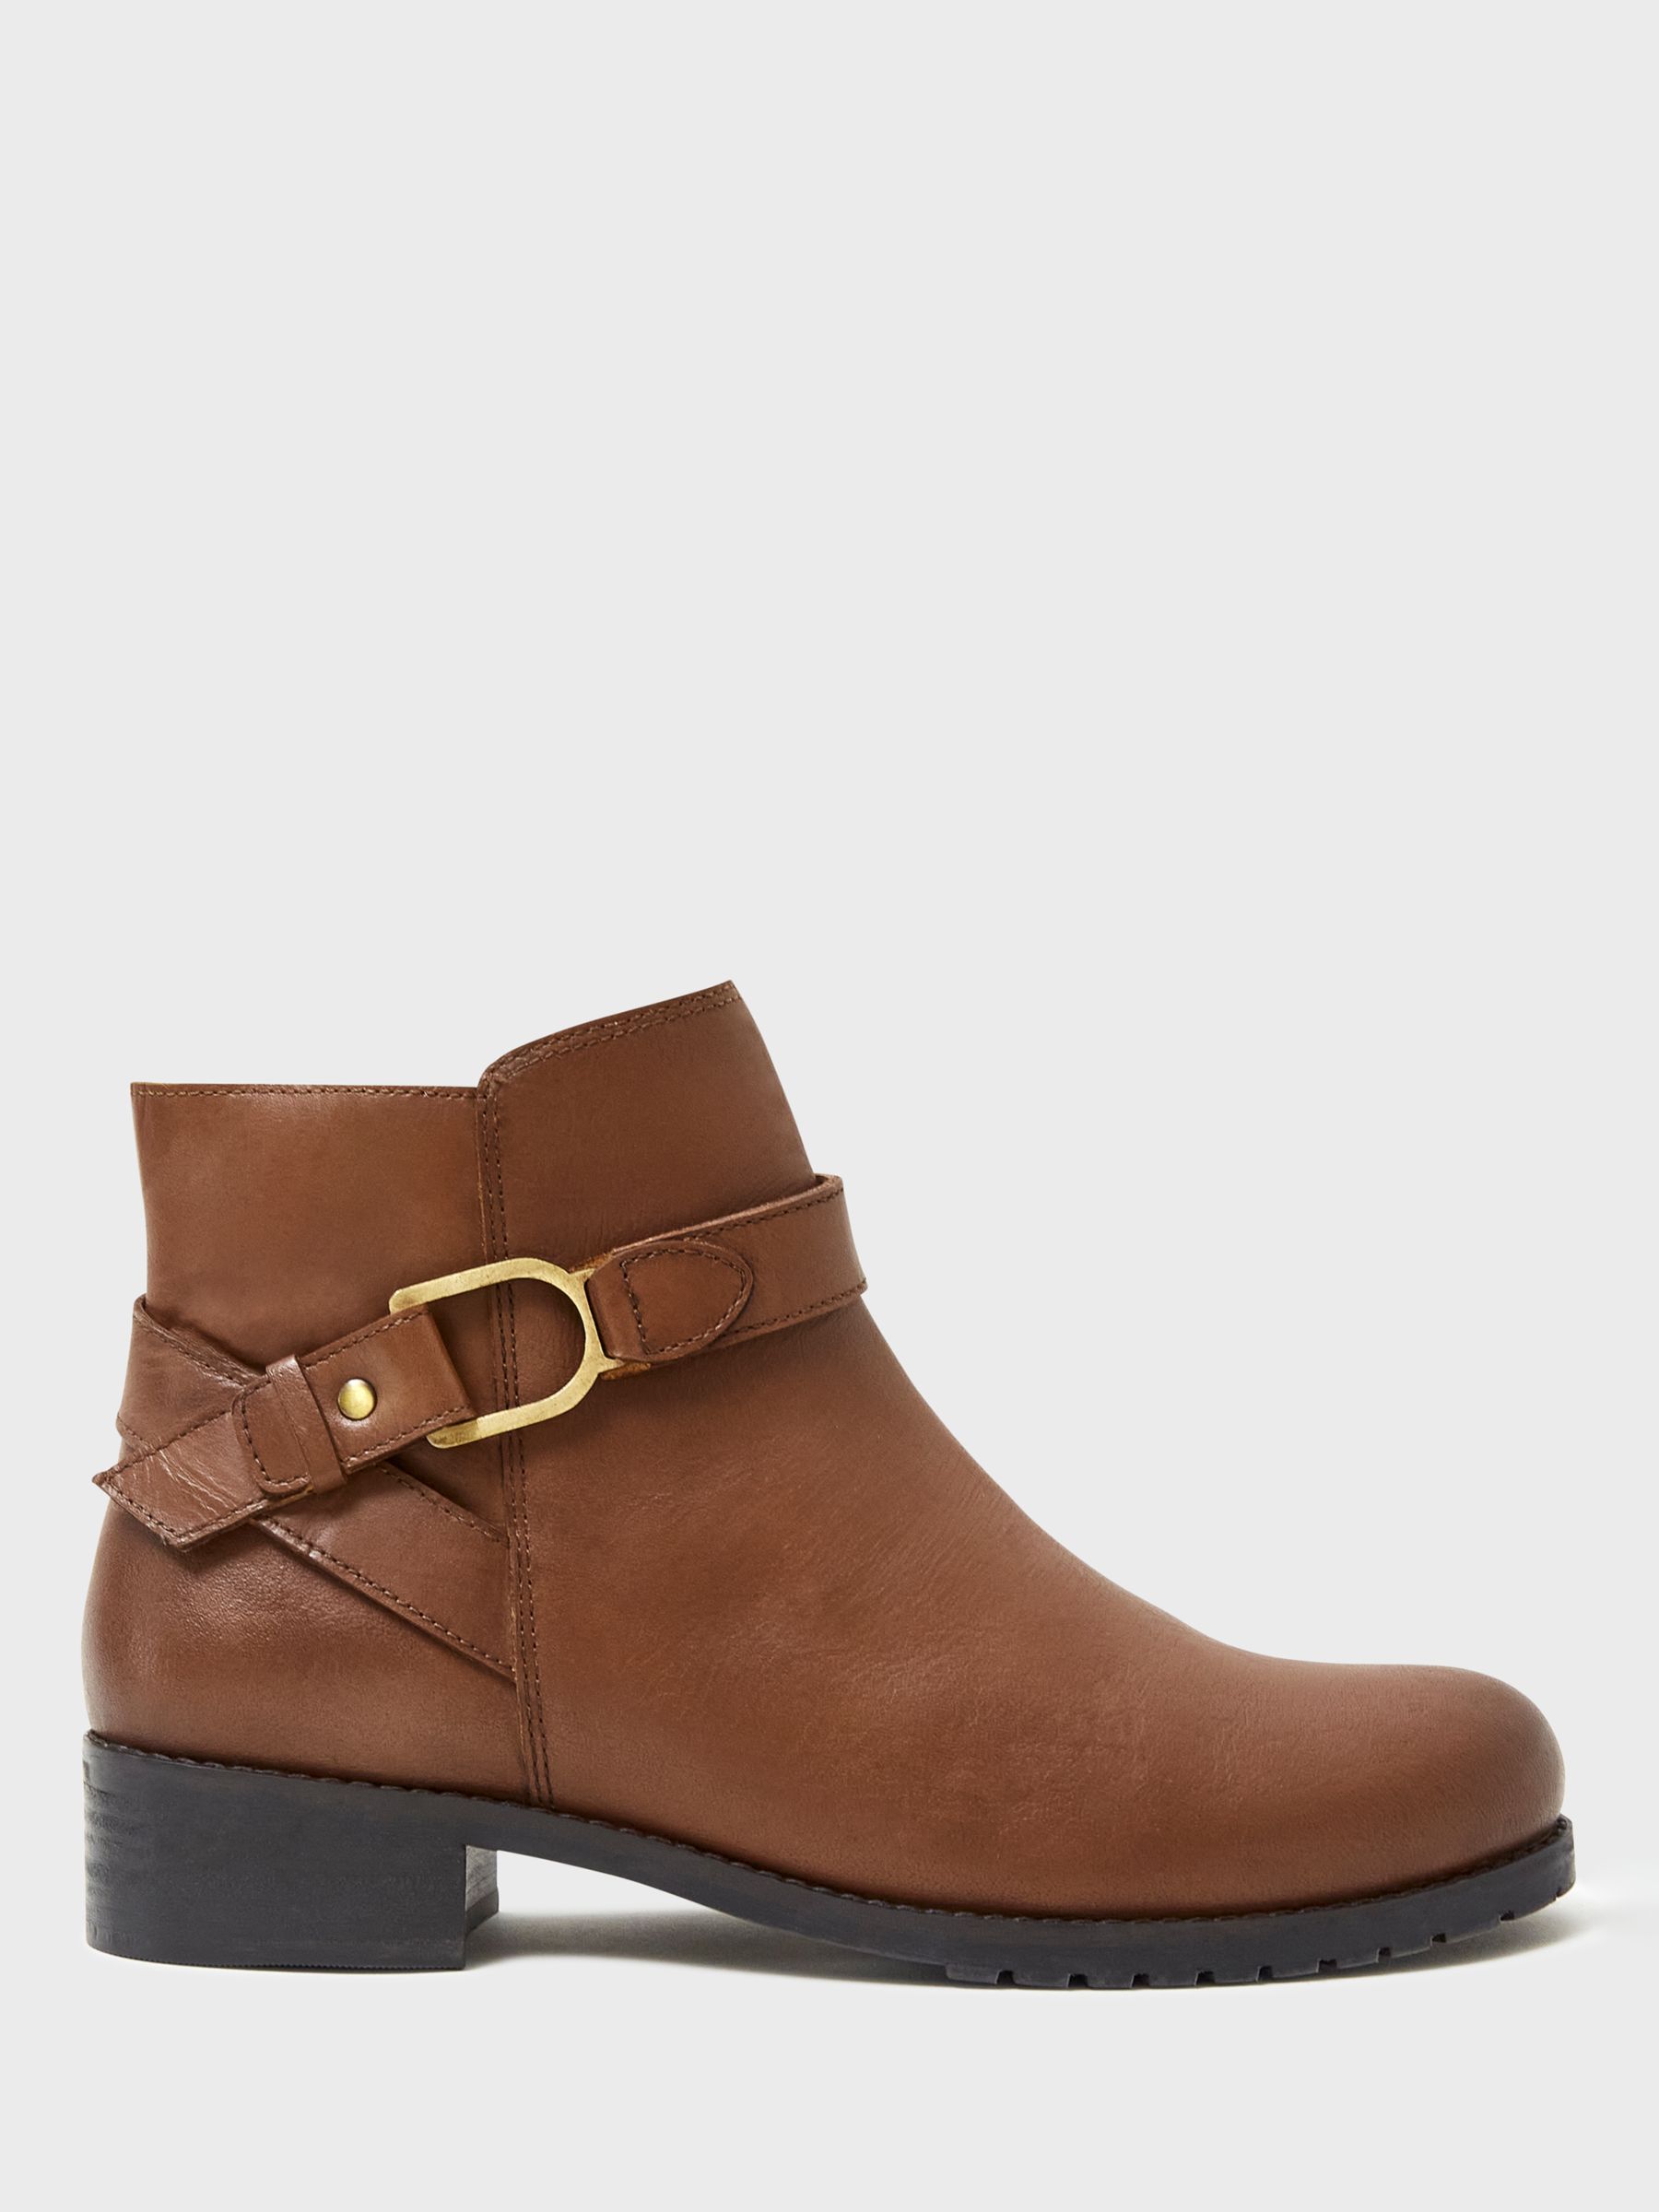 Crew Clothing Lucy Borg Lined Leather Boots, Chocolate Brown at John ...